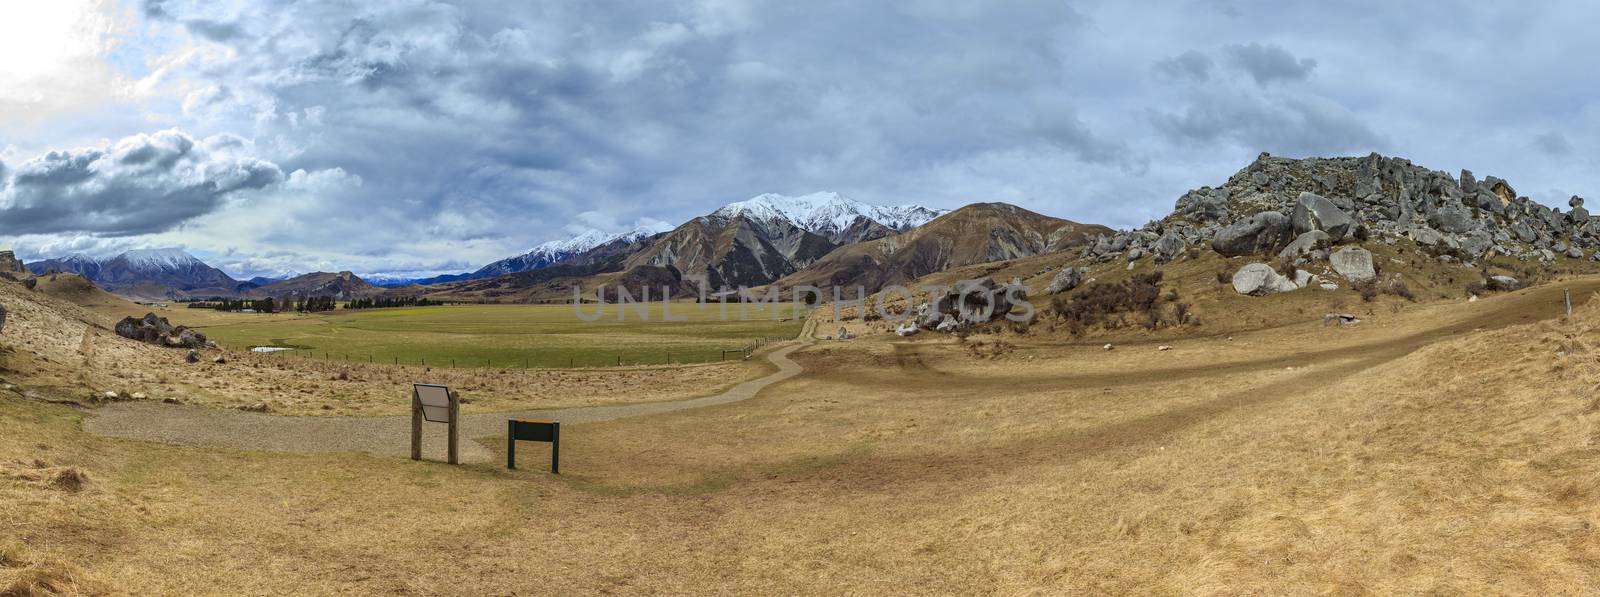 beautiful landscape panorama view of castle hill in arthur's pas by khunaspix